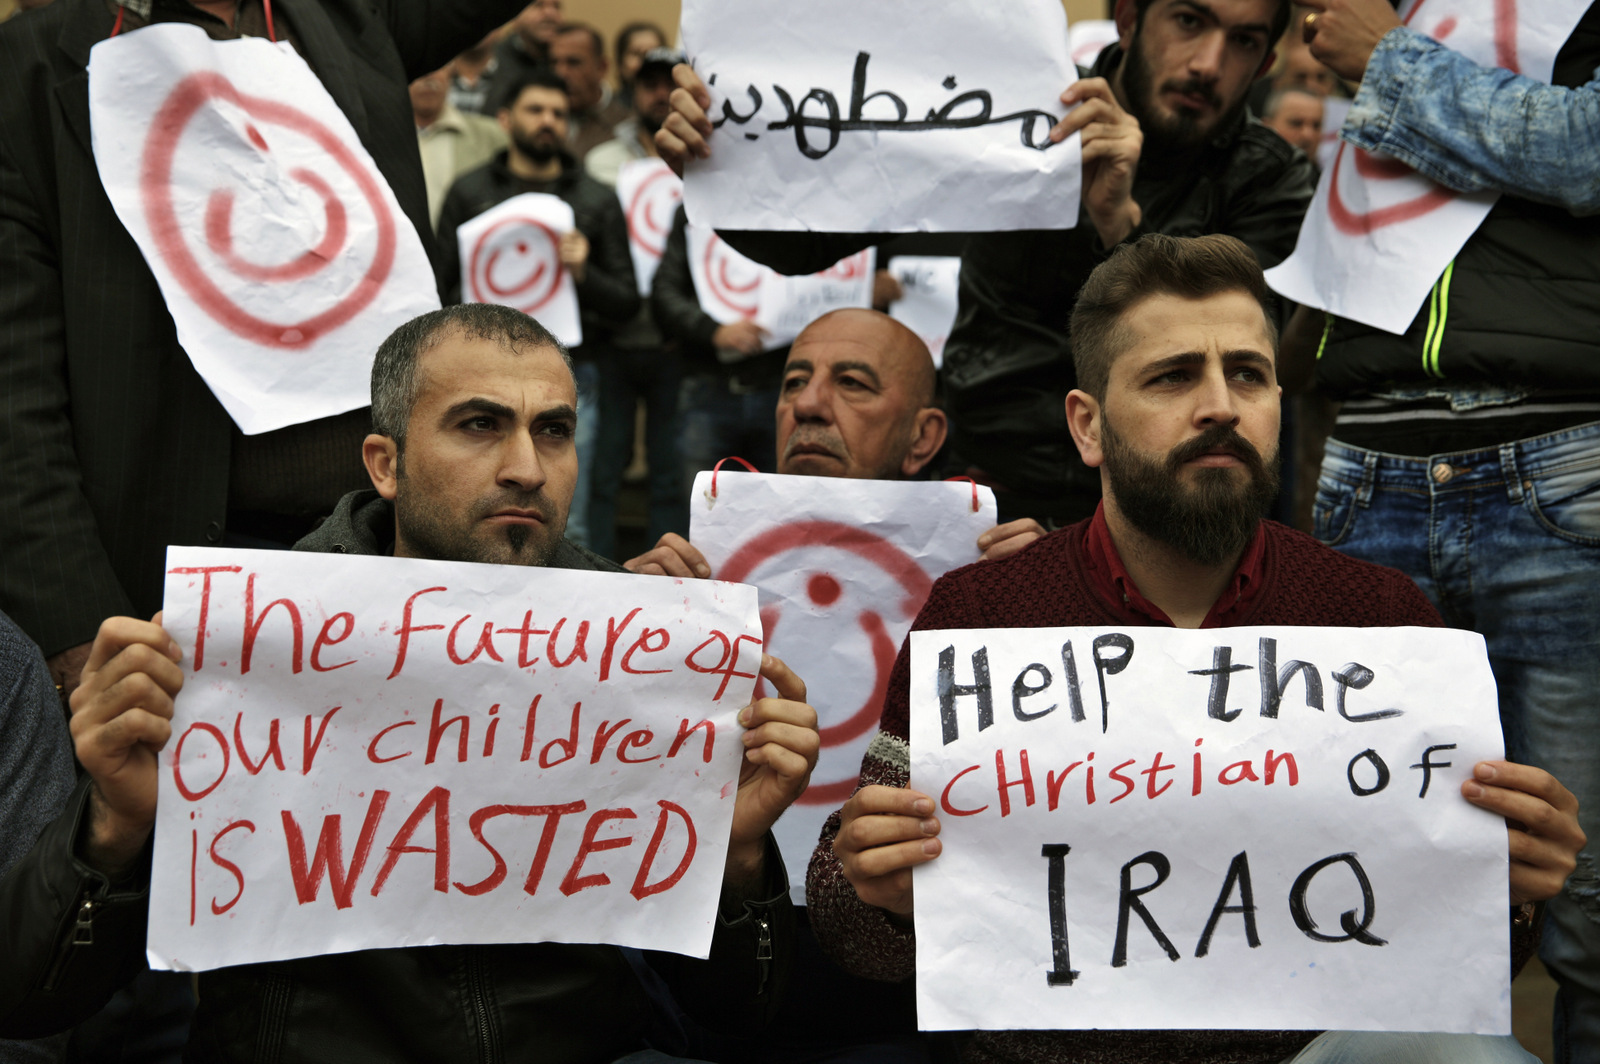 Iraqi Christians who live in Lebanon hold placards during a sit-in, in front of the United Nations Headquarters demanding speeding up their immigration cases in Beirut, Lebanon, Feb. 13, 2017. Thousands of Christians from Iraq and Syria have fled violence in their country and sought refuge in Lebanon, a religiously-mixed country. The placard in Arabic reads "Oppressed." (AP/Bilal Hussein)